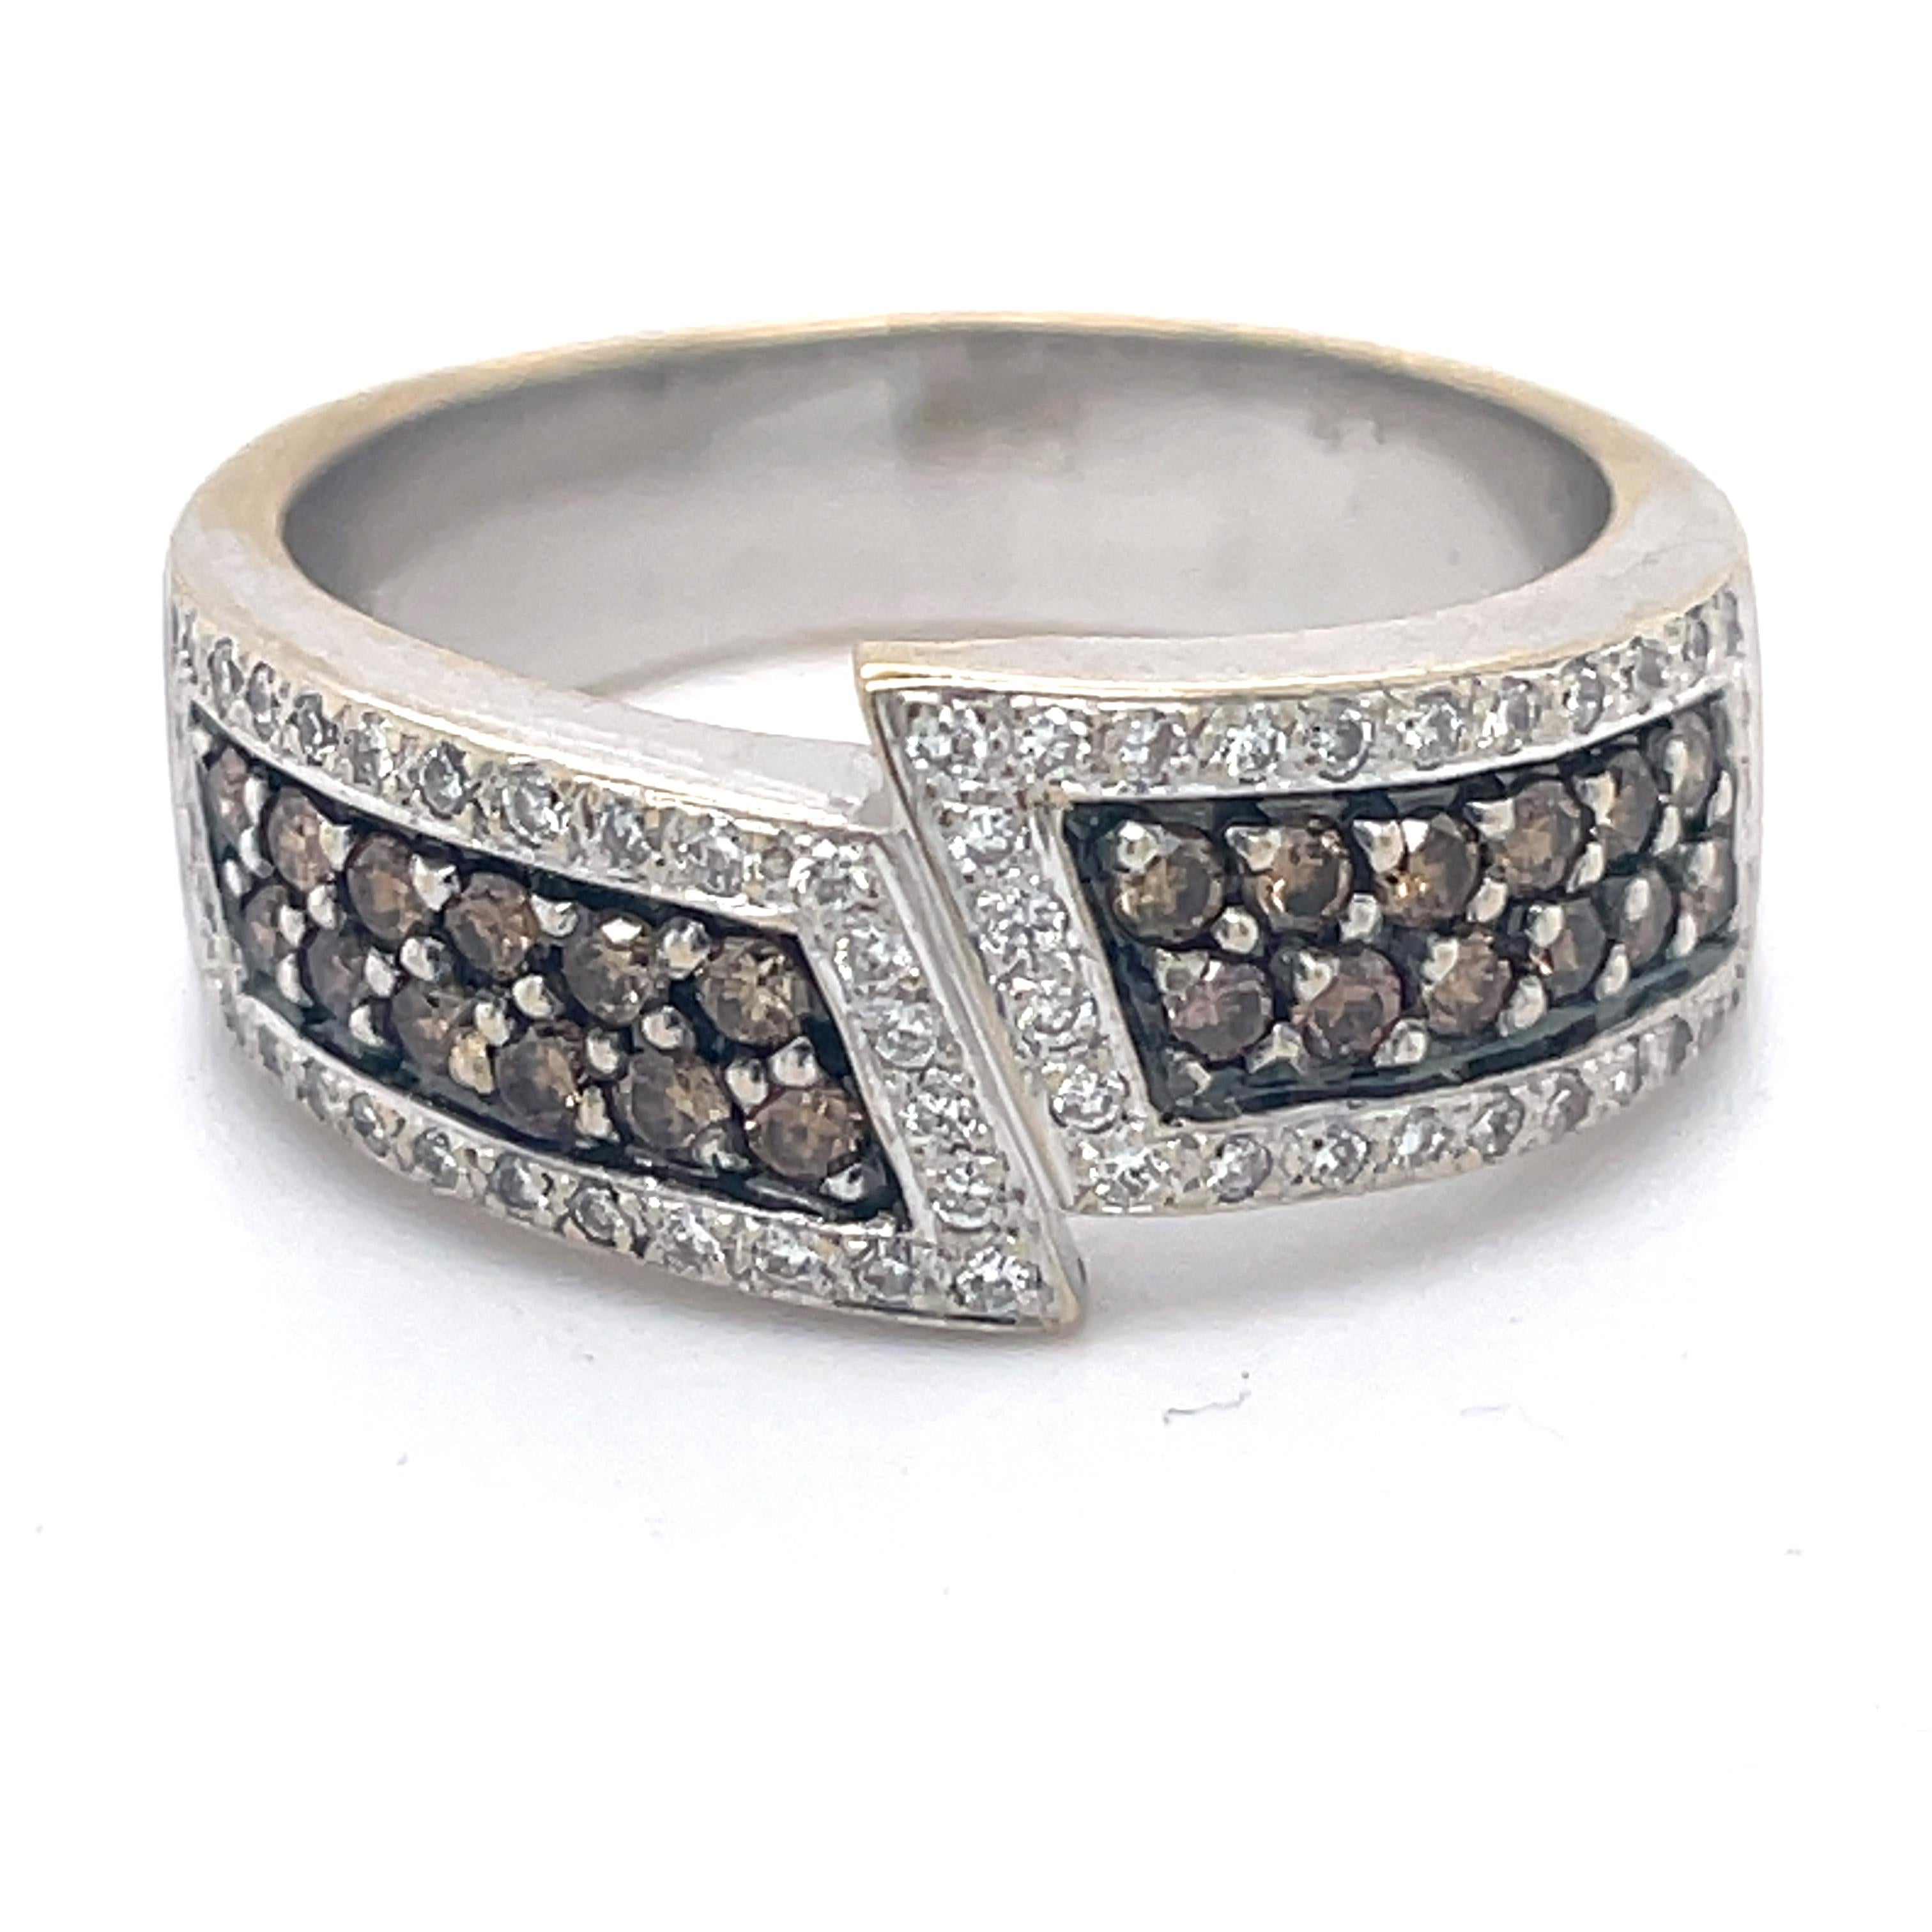 unique Vintage brown diamonds ring, 18k White Gold ring, Champaign diamonds ring

Jewelry Material: White Gold 18k (the gold has been tested by a professional)
Total Carat Weight: 0.75ct (Approx.)
Total Metal Weight:6.9 g
Size:6.5 US

Grading